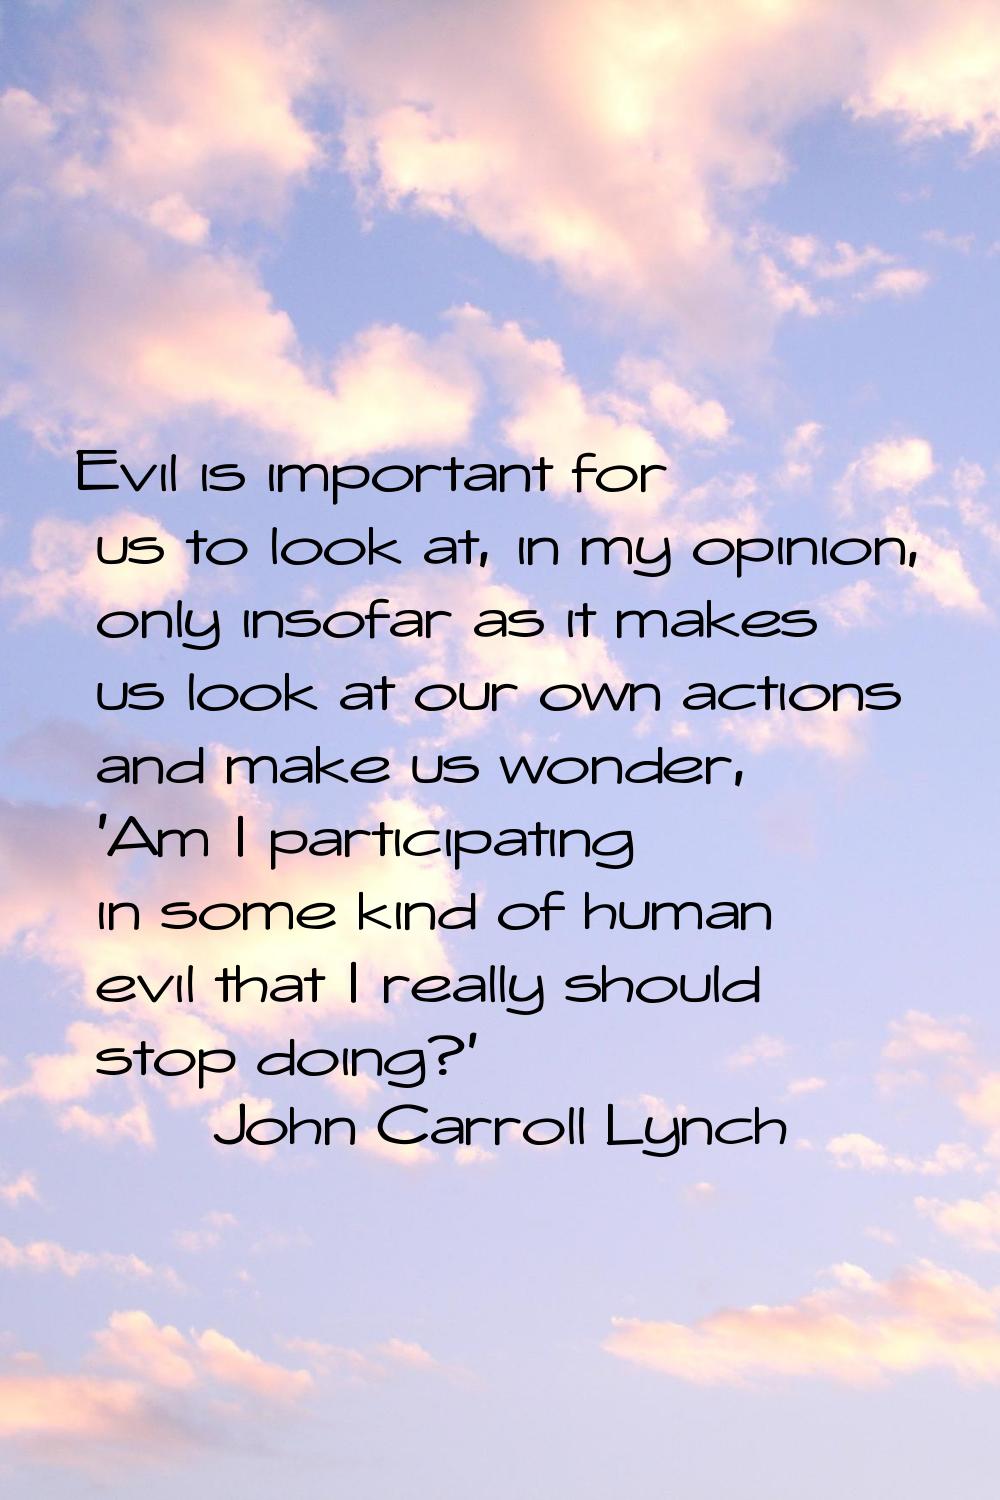 Evil is important for us to look at, in my opinion, only insofar as it makes us look at our own act